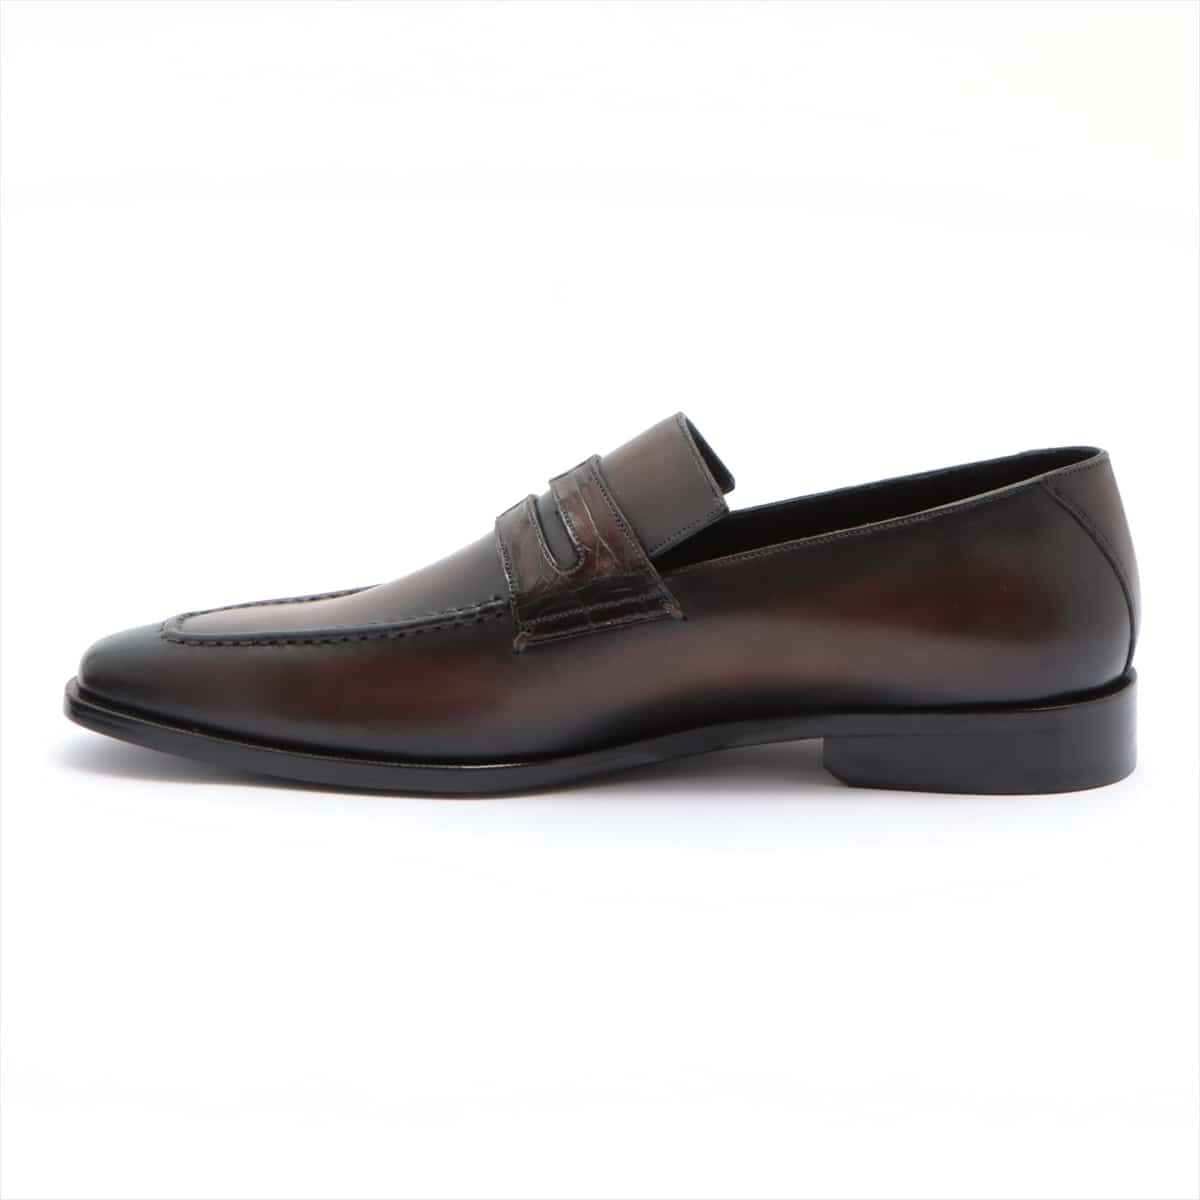 Berluti Andy Leather Loafer 8.5 Men's Brown Patine